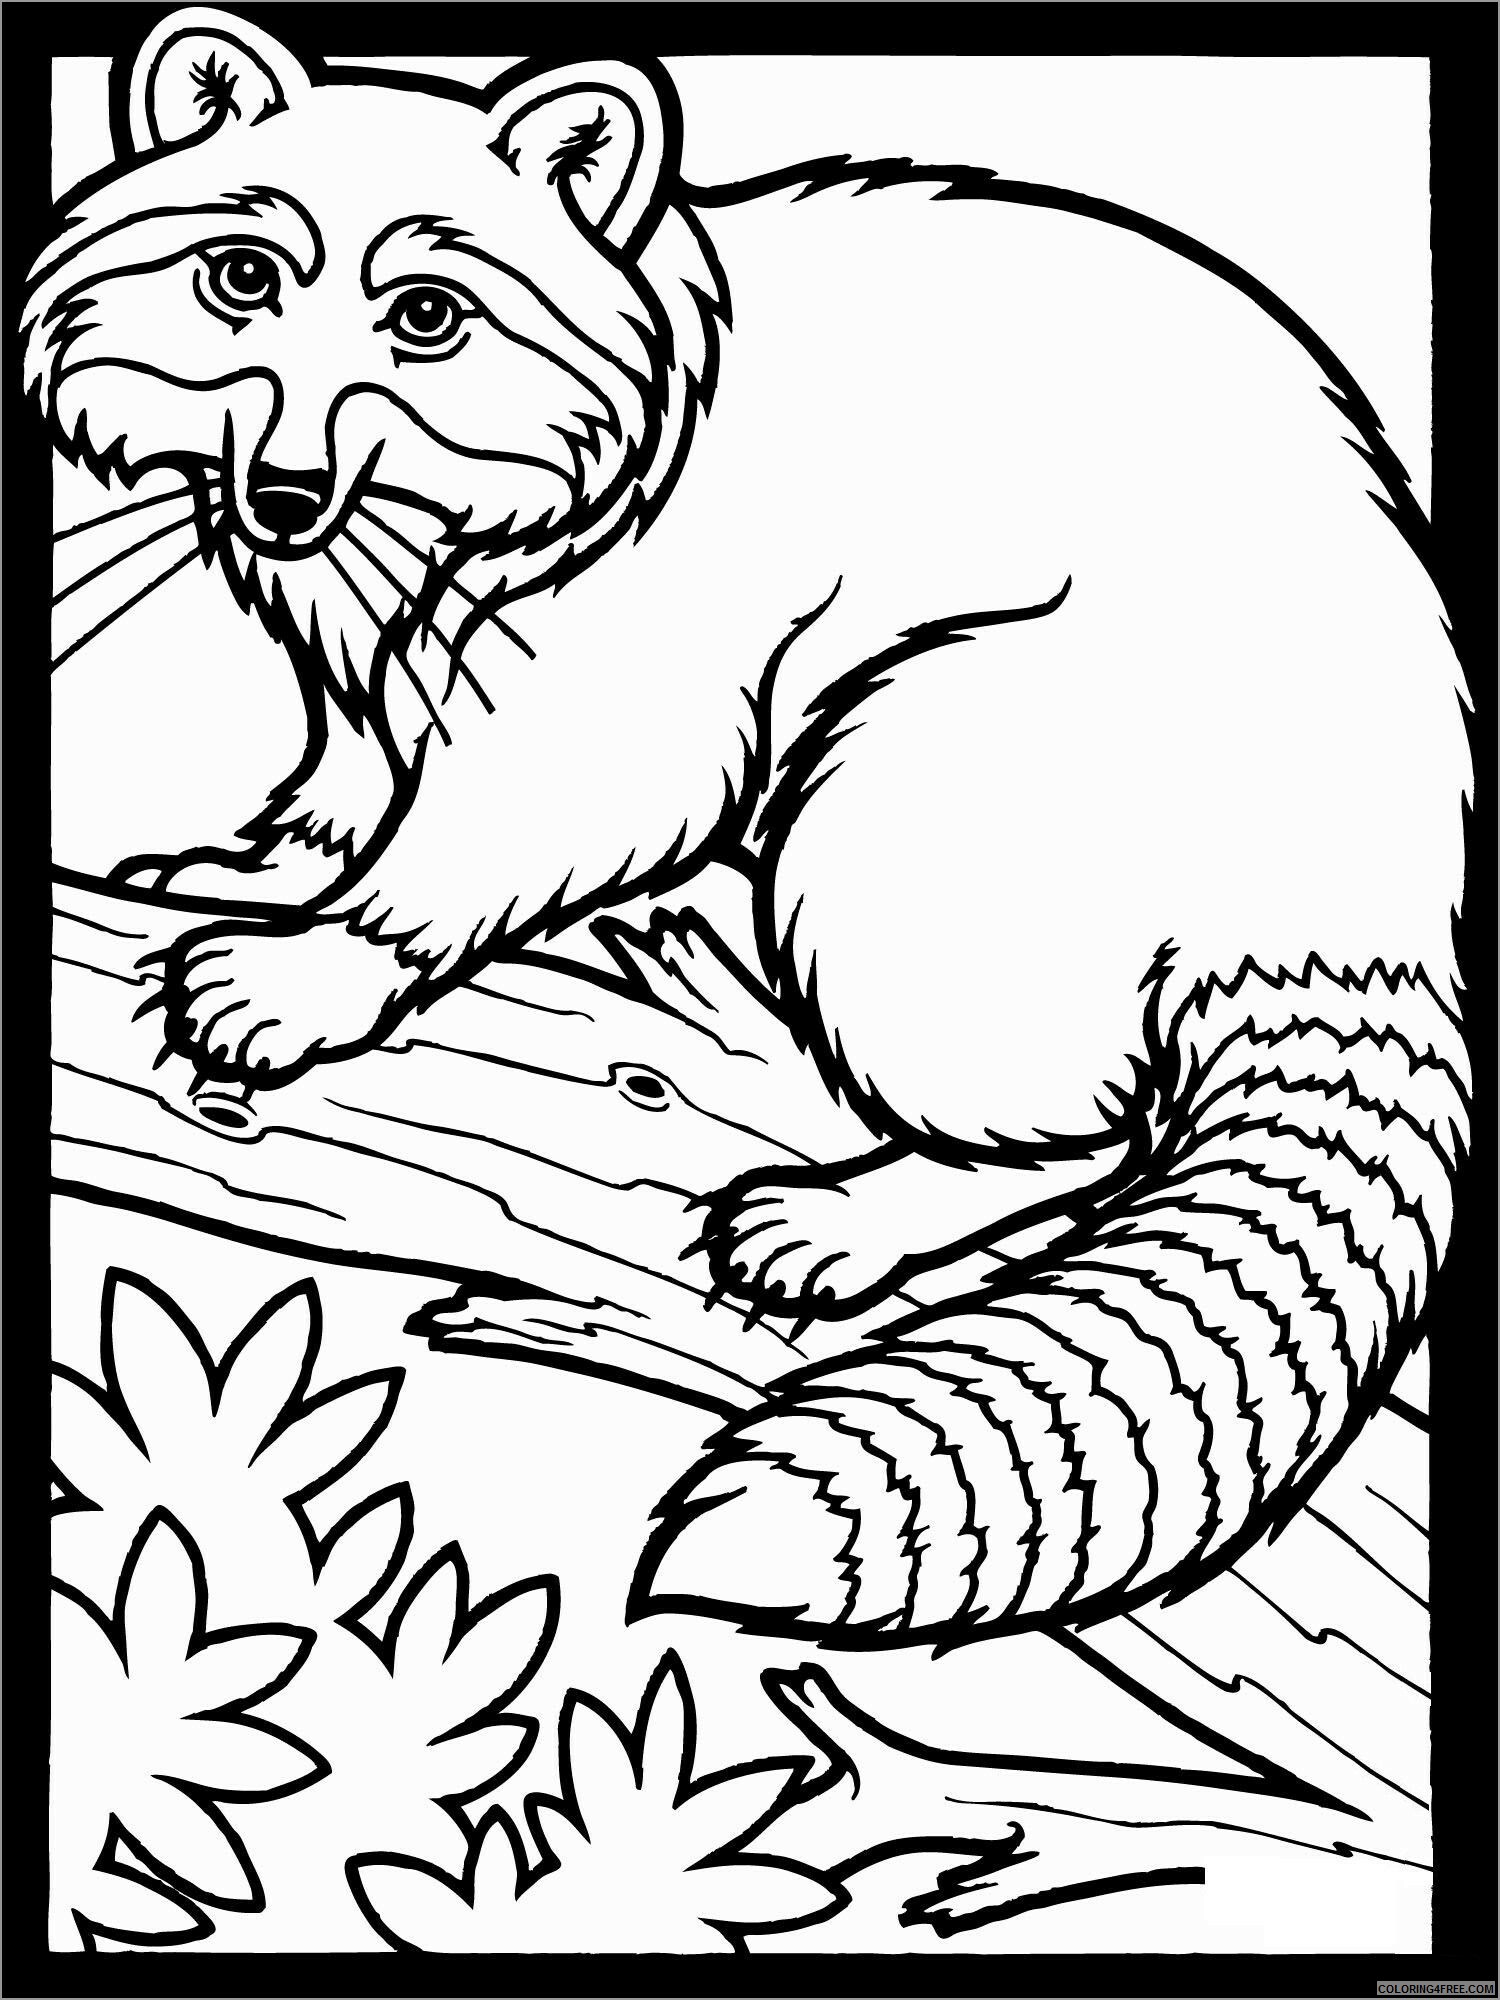 Raccoon Coloring Pages Animal Printable Sheets free raccoon for kids 2021 4200 Coloring4free